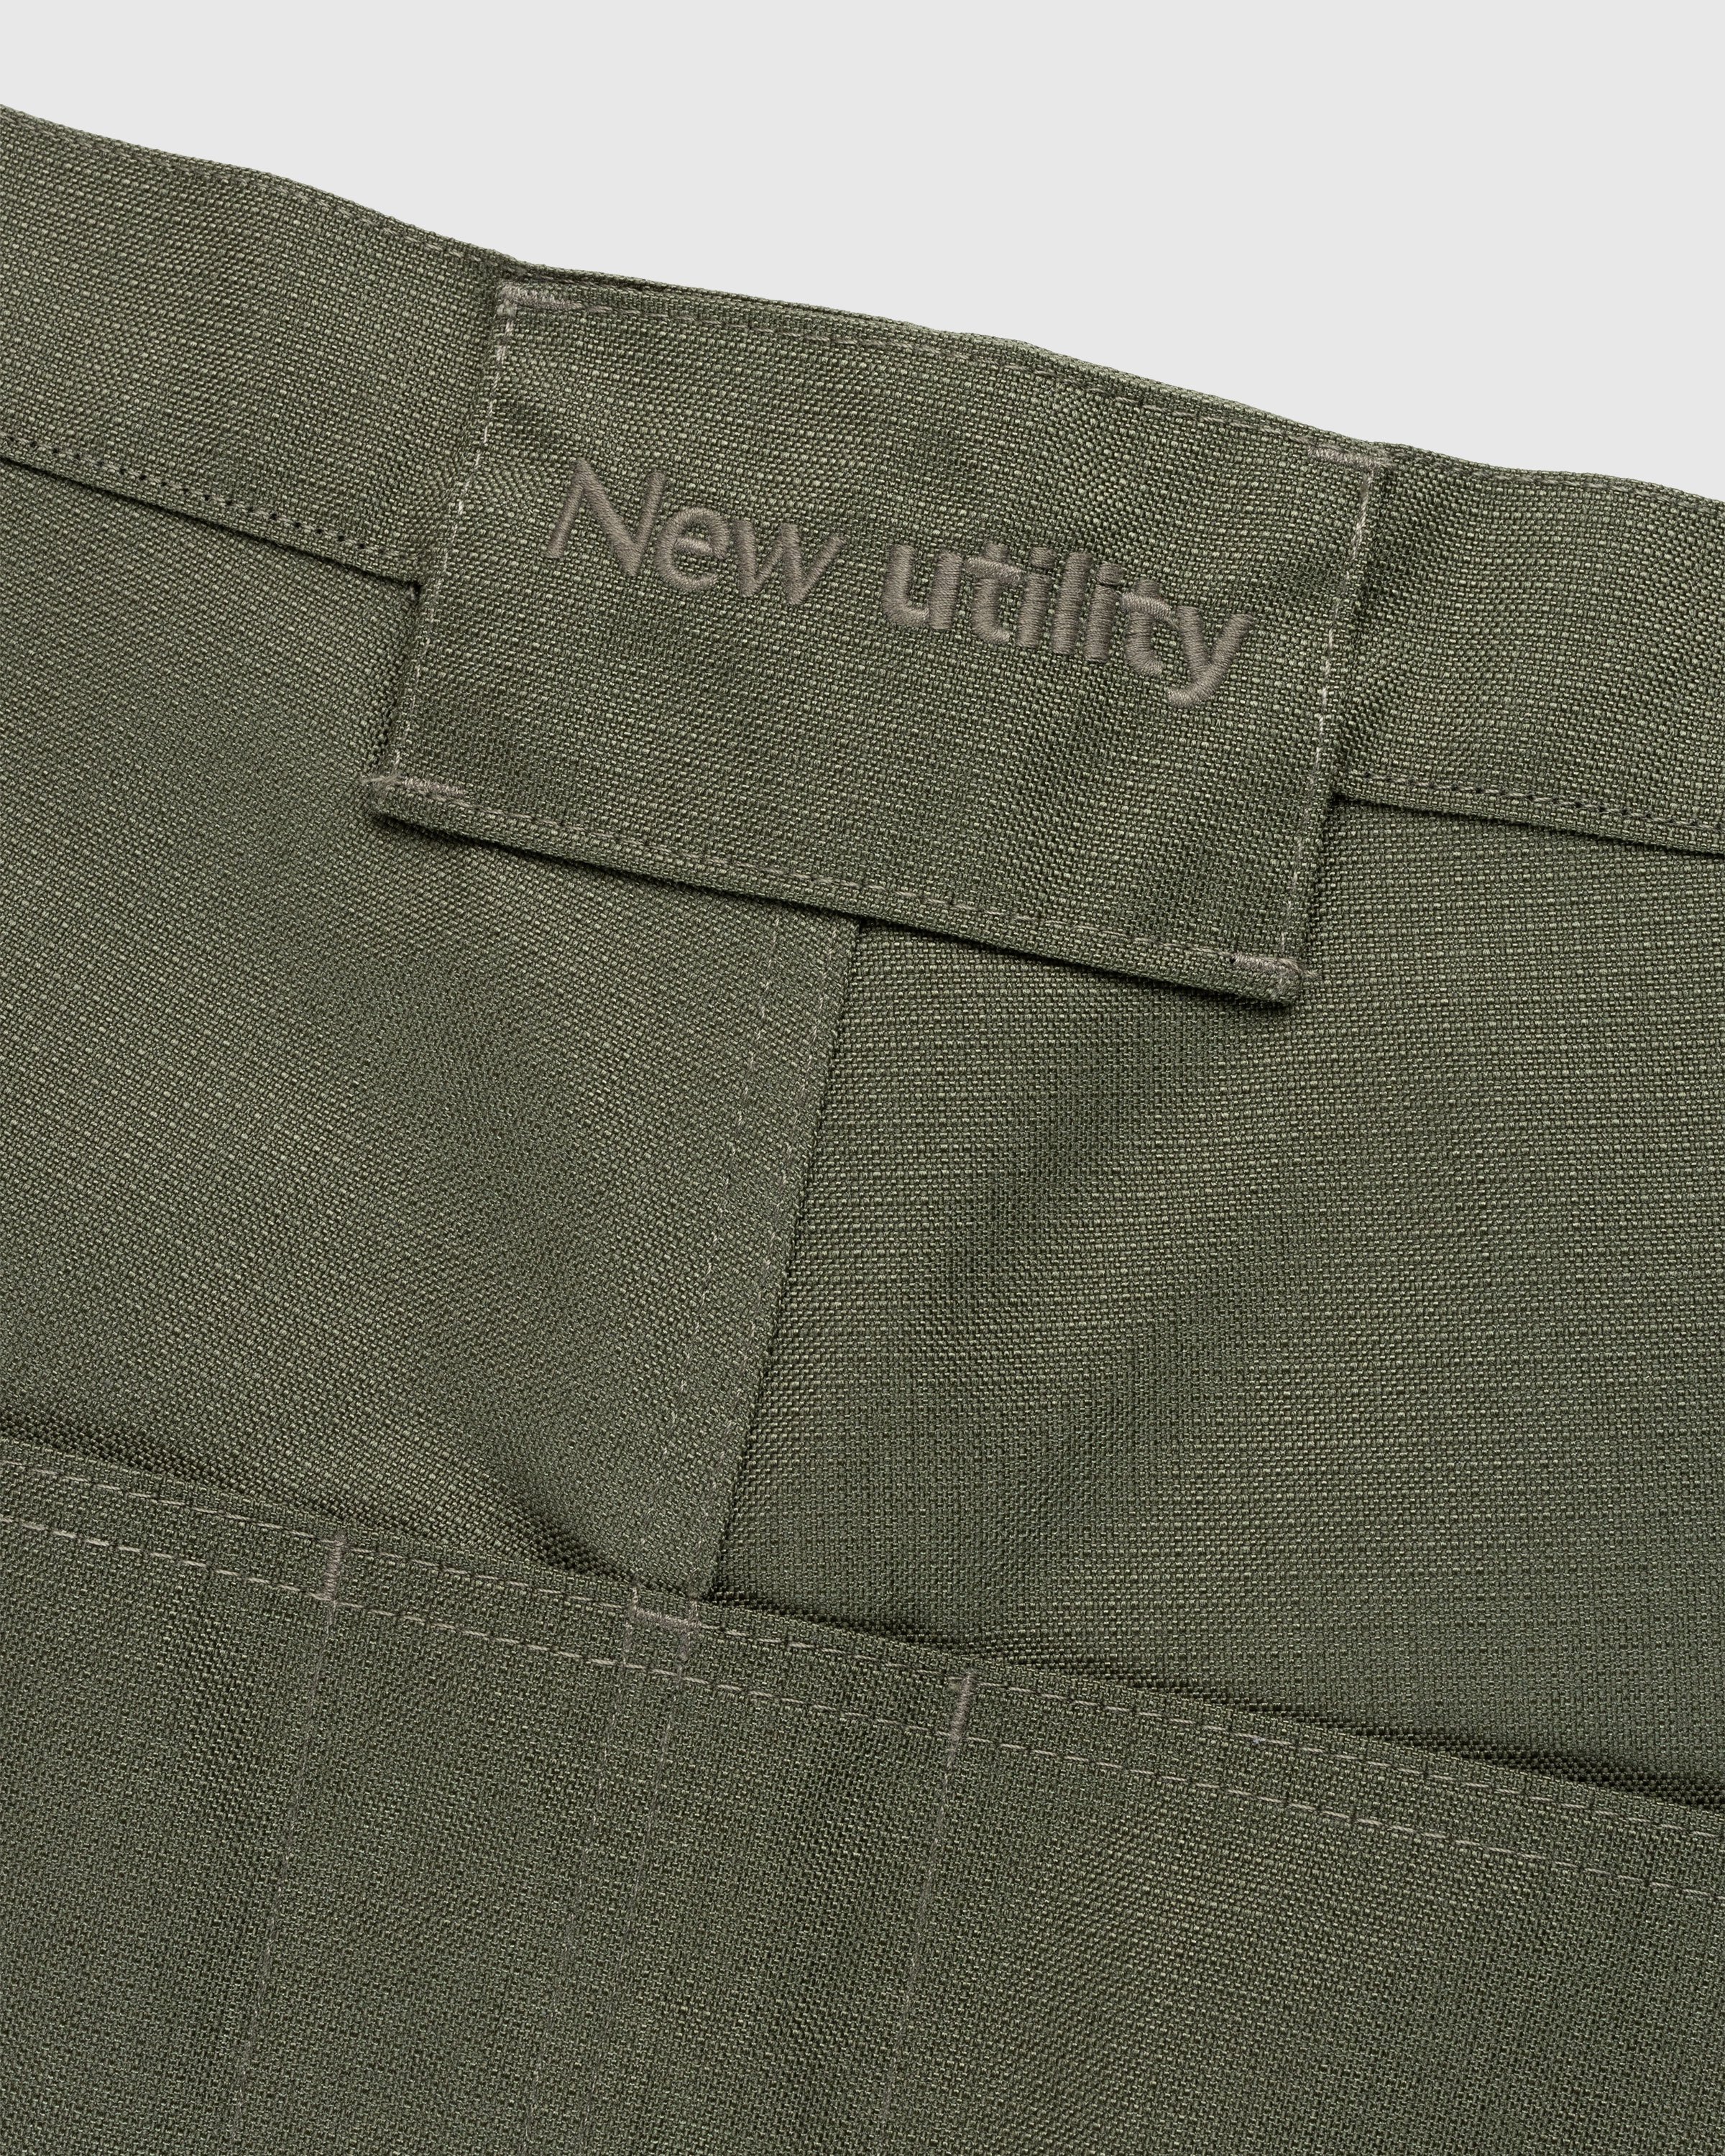 AFFXWRKS - Duty Pant Green - Clothing - Green - Image 5